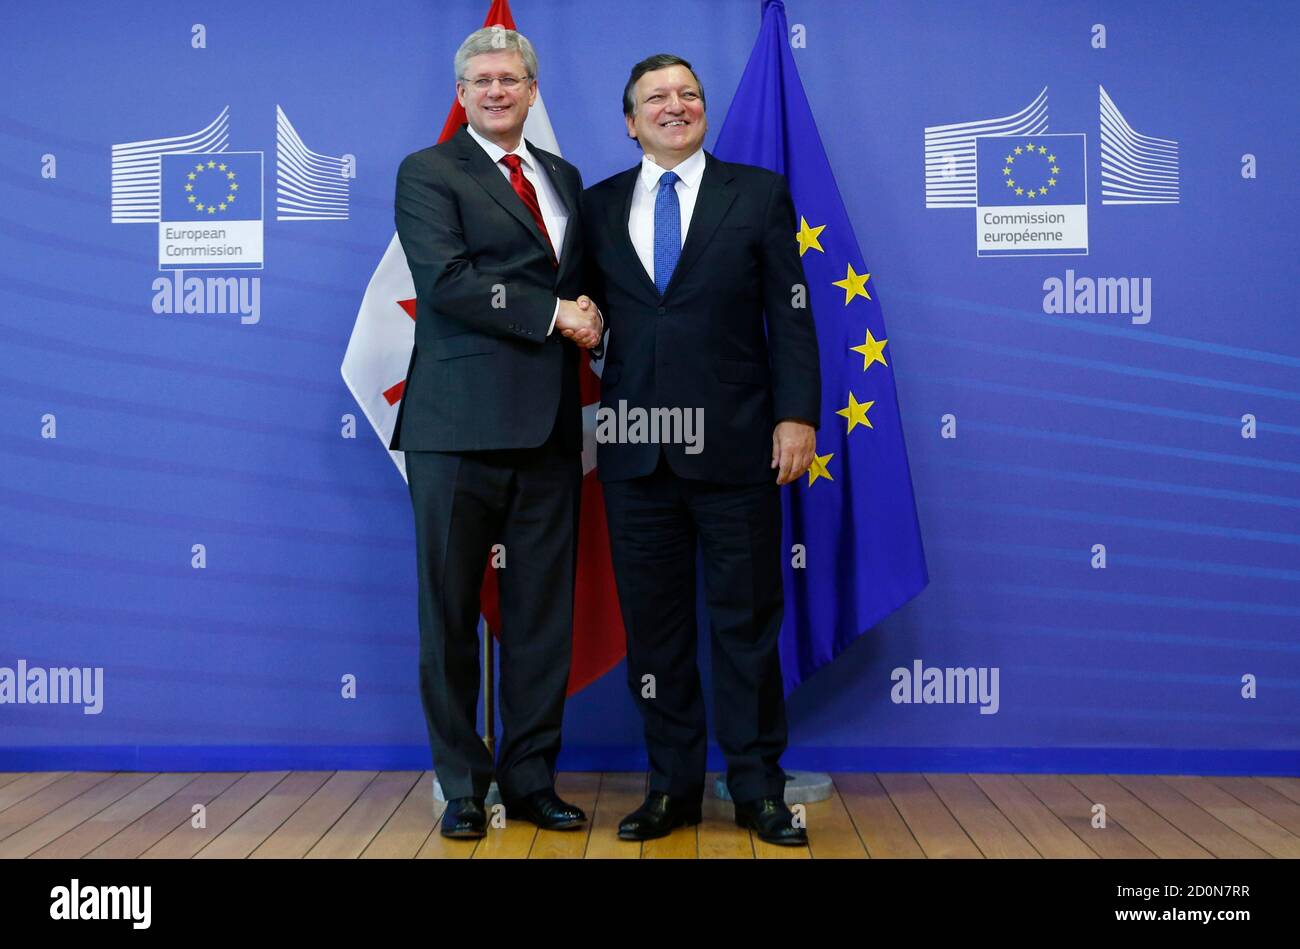 European Commission President Jose Manuel Barroso poses with Canadian Prime Minister Stephen Harper (L) ahead of a meeting at the EU Commission headquarters in Brussels October 18, 2013. The European Union and Canada are expected to close talks on a multi-billion-dollar trade deal on Friday that will integrate two of the world's biggest economies, if they can overcome final disagreements ranging from medicine patents to feta cheese.    REUTERS/Francois Lenoir (BELGIUM - Tags: POLITICS BUSINESS) Stock Photo